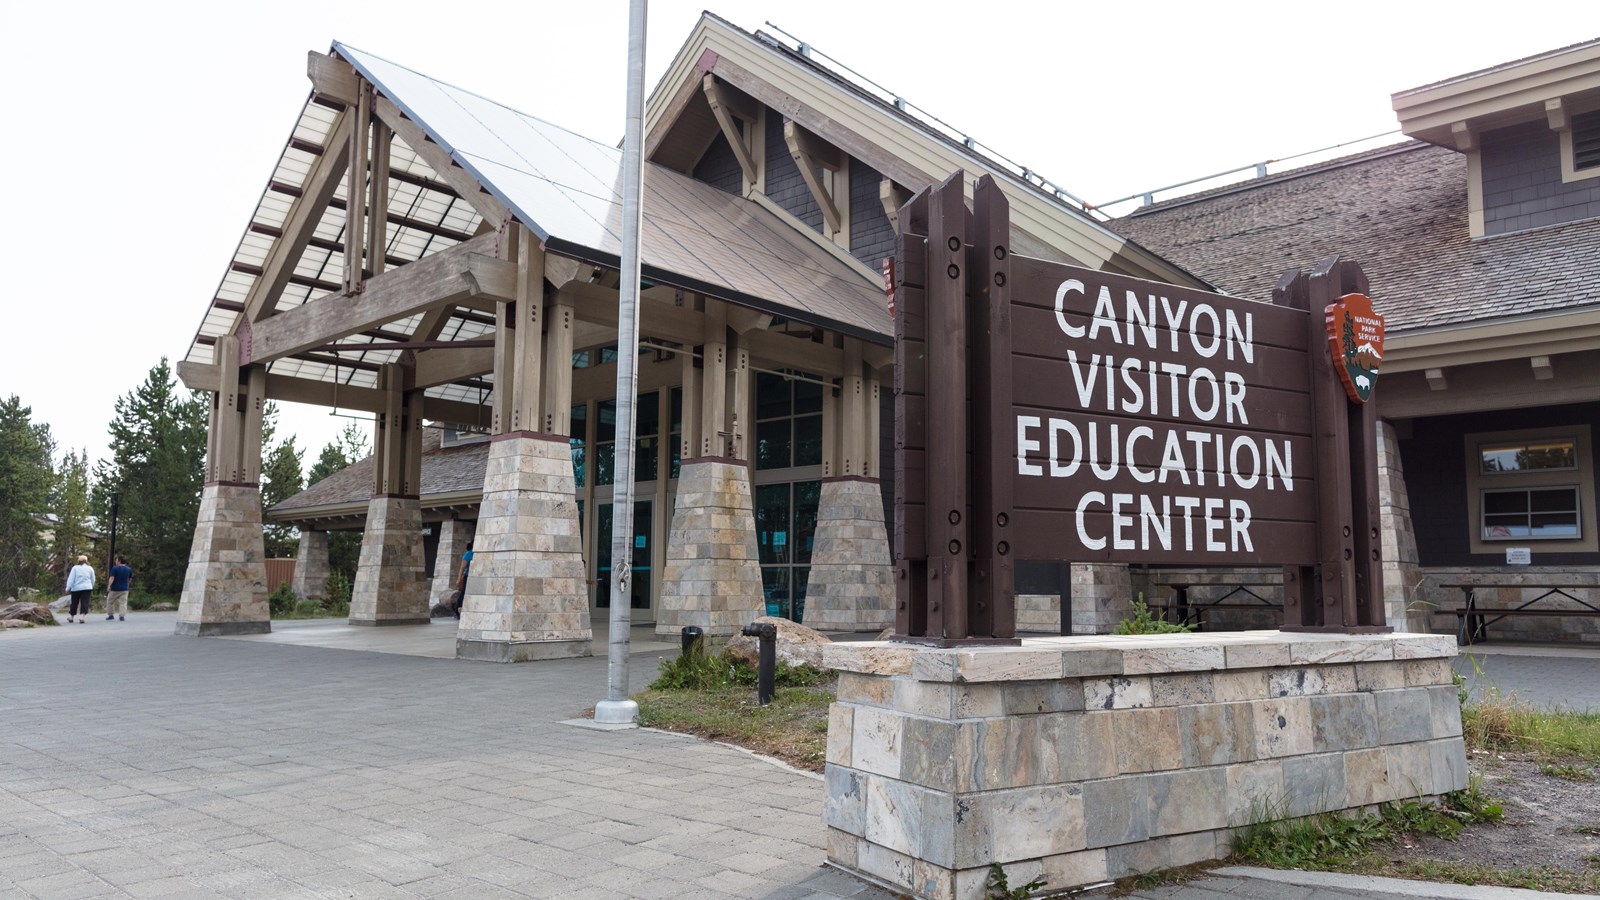 A large timber framed building with a Canyon Visitor Education Center sign in front.